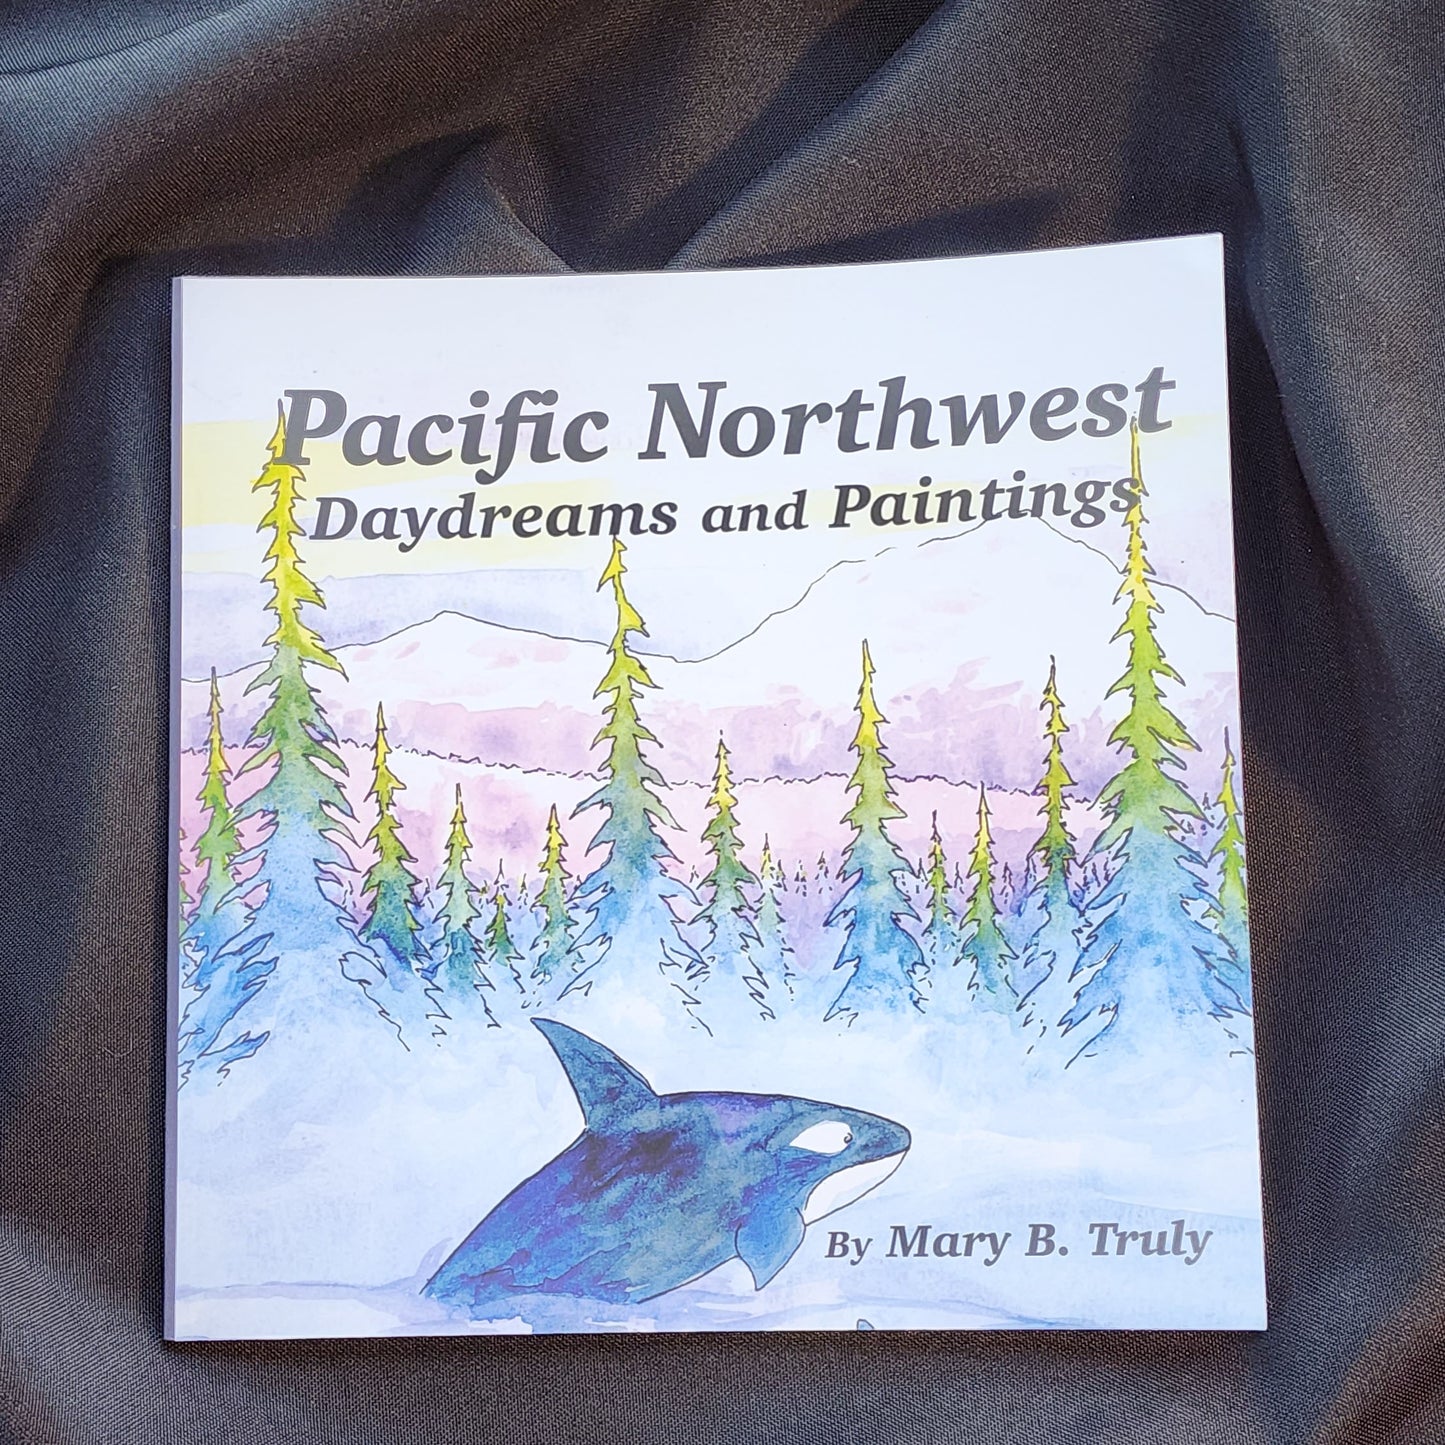 Pacific Northwest Daydreams and Paintings